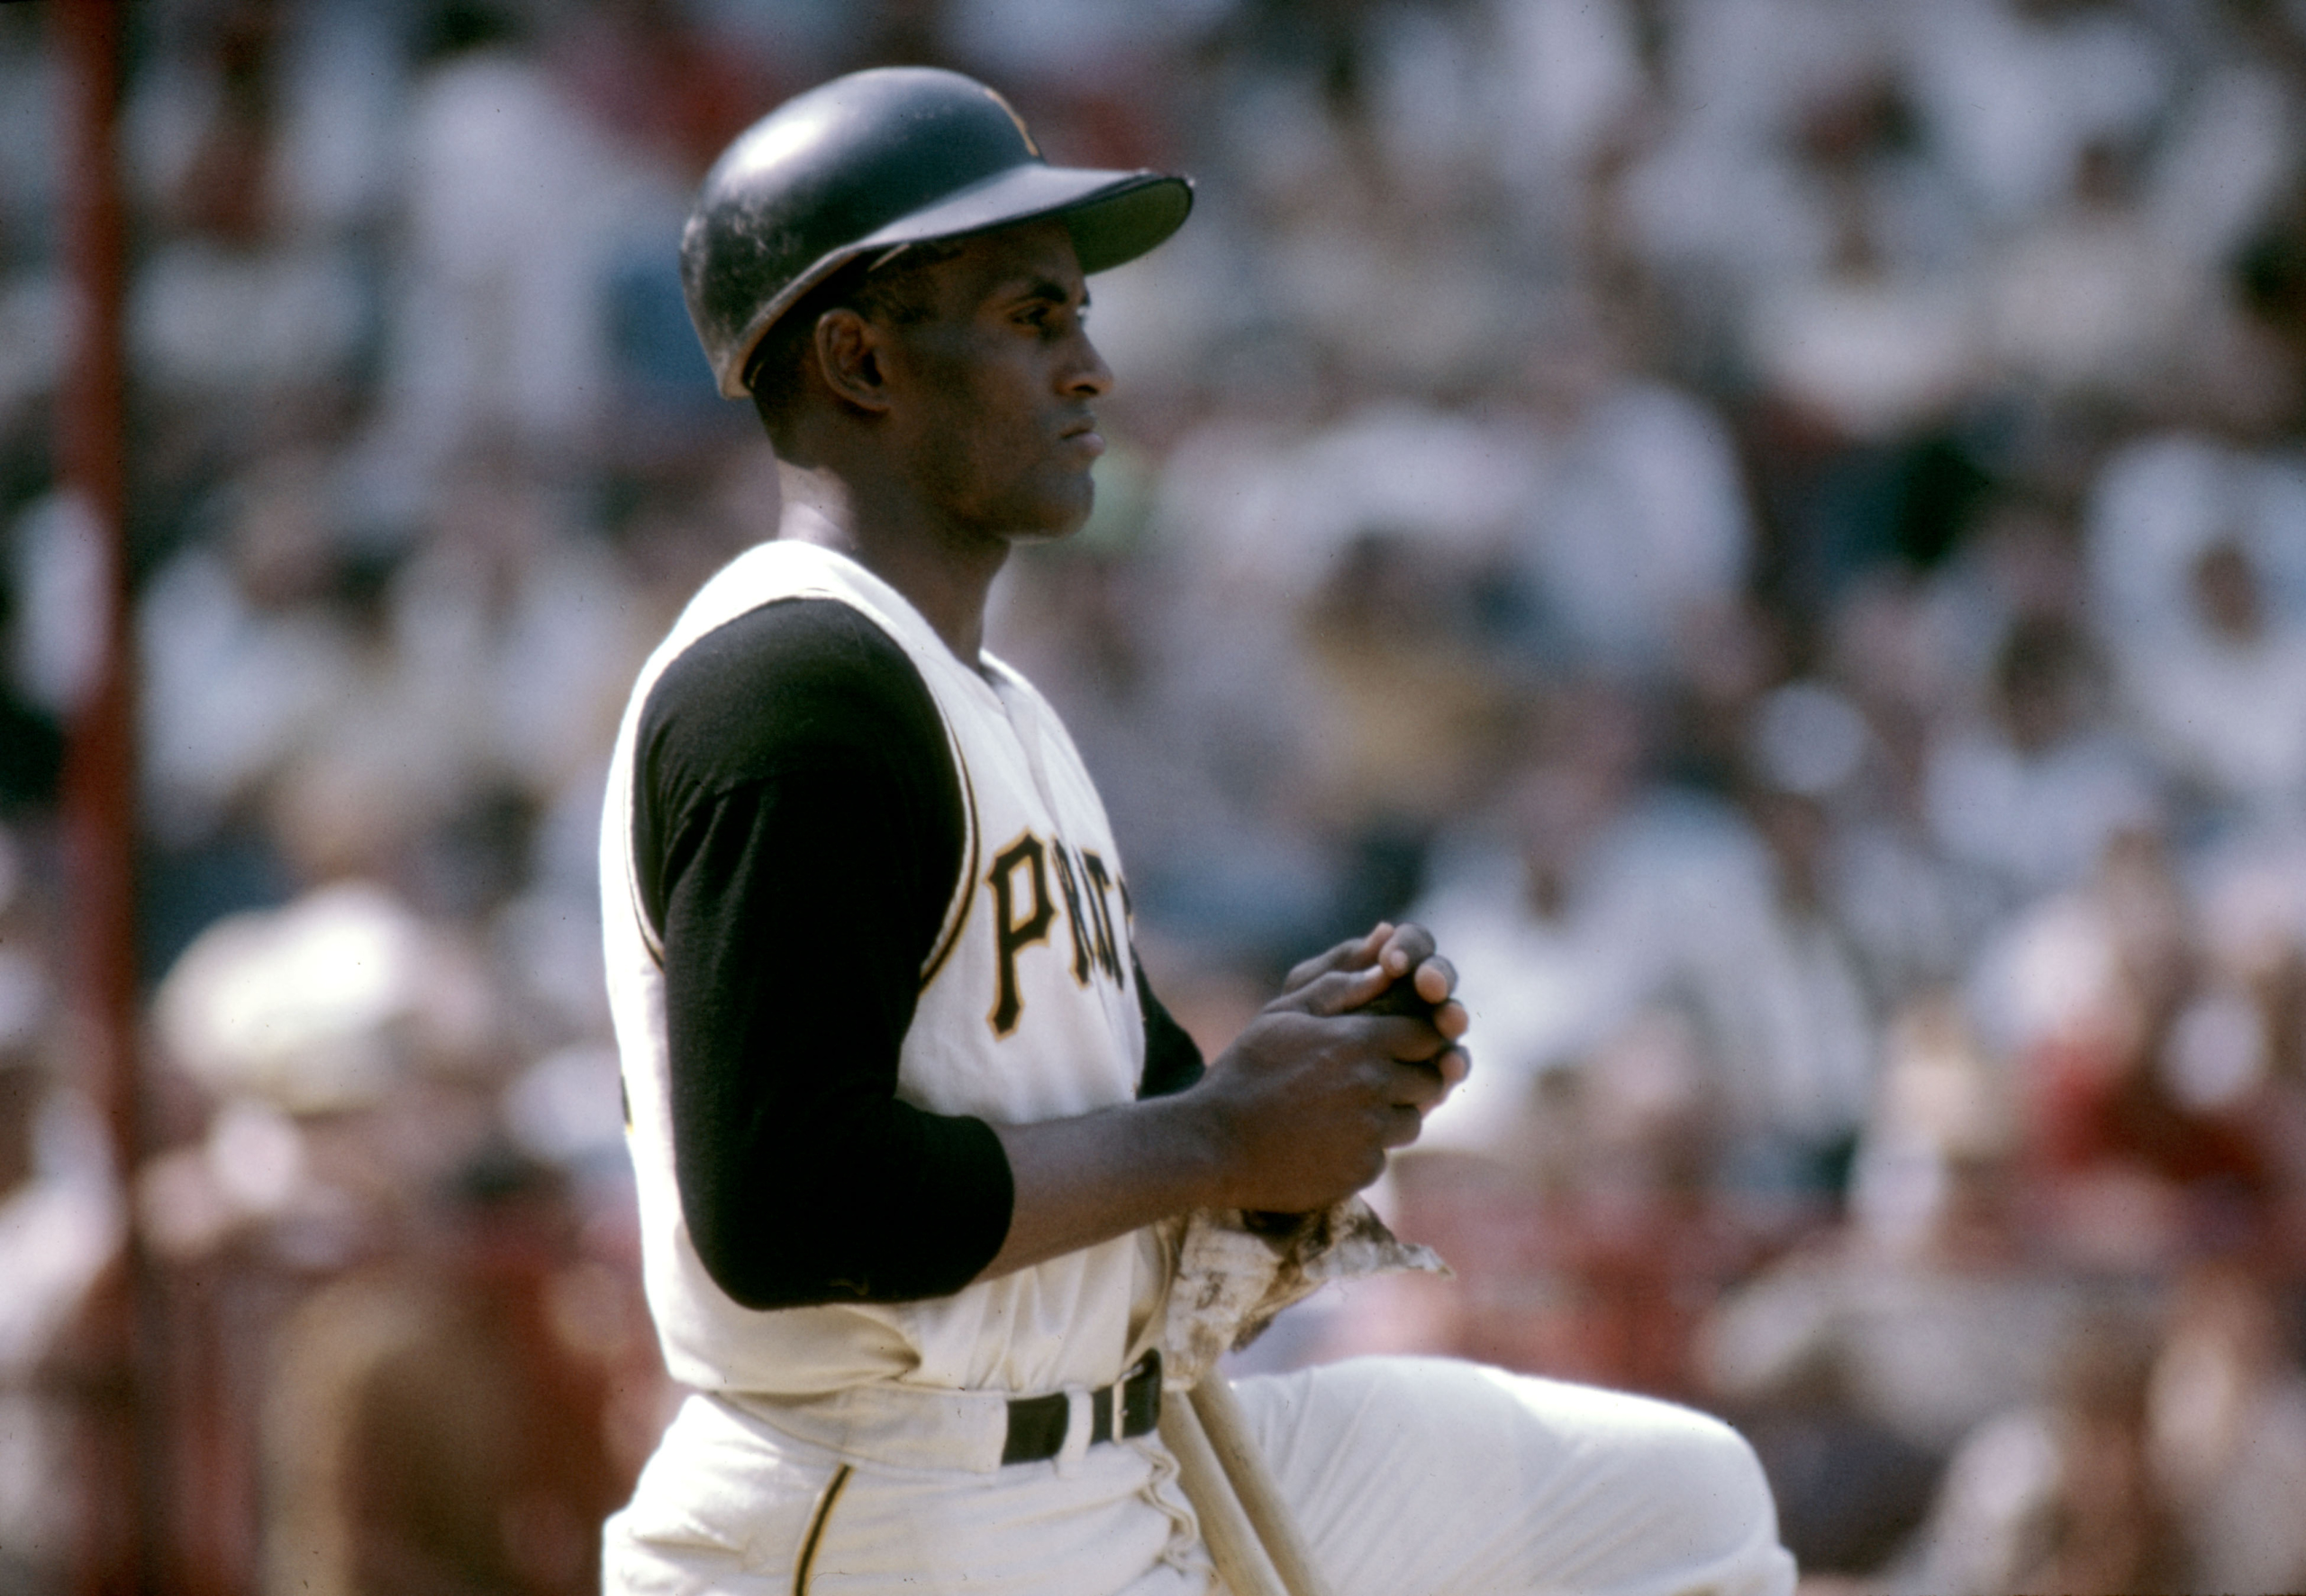 On this day in 1972, Baseball Hall of Fame player Roberto Clemente